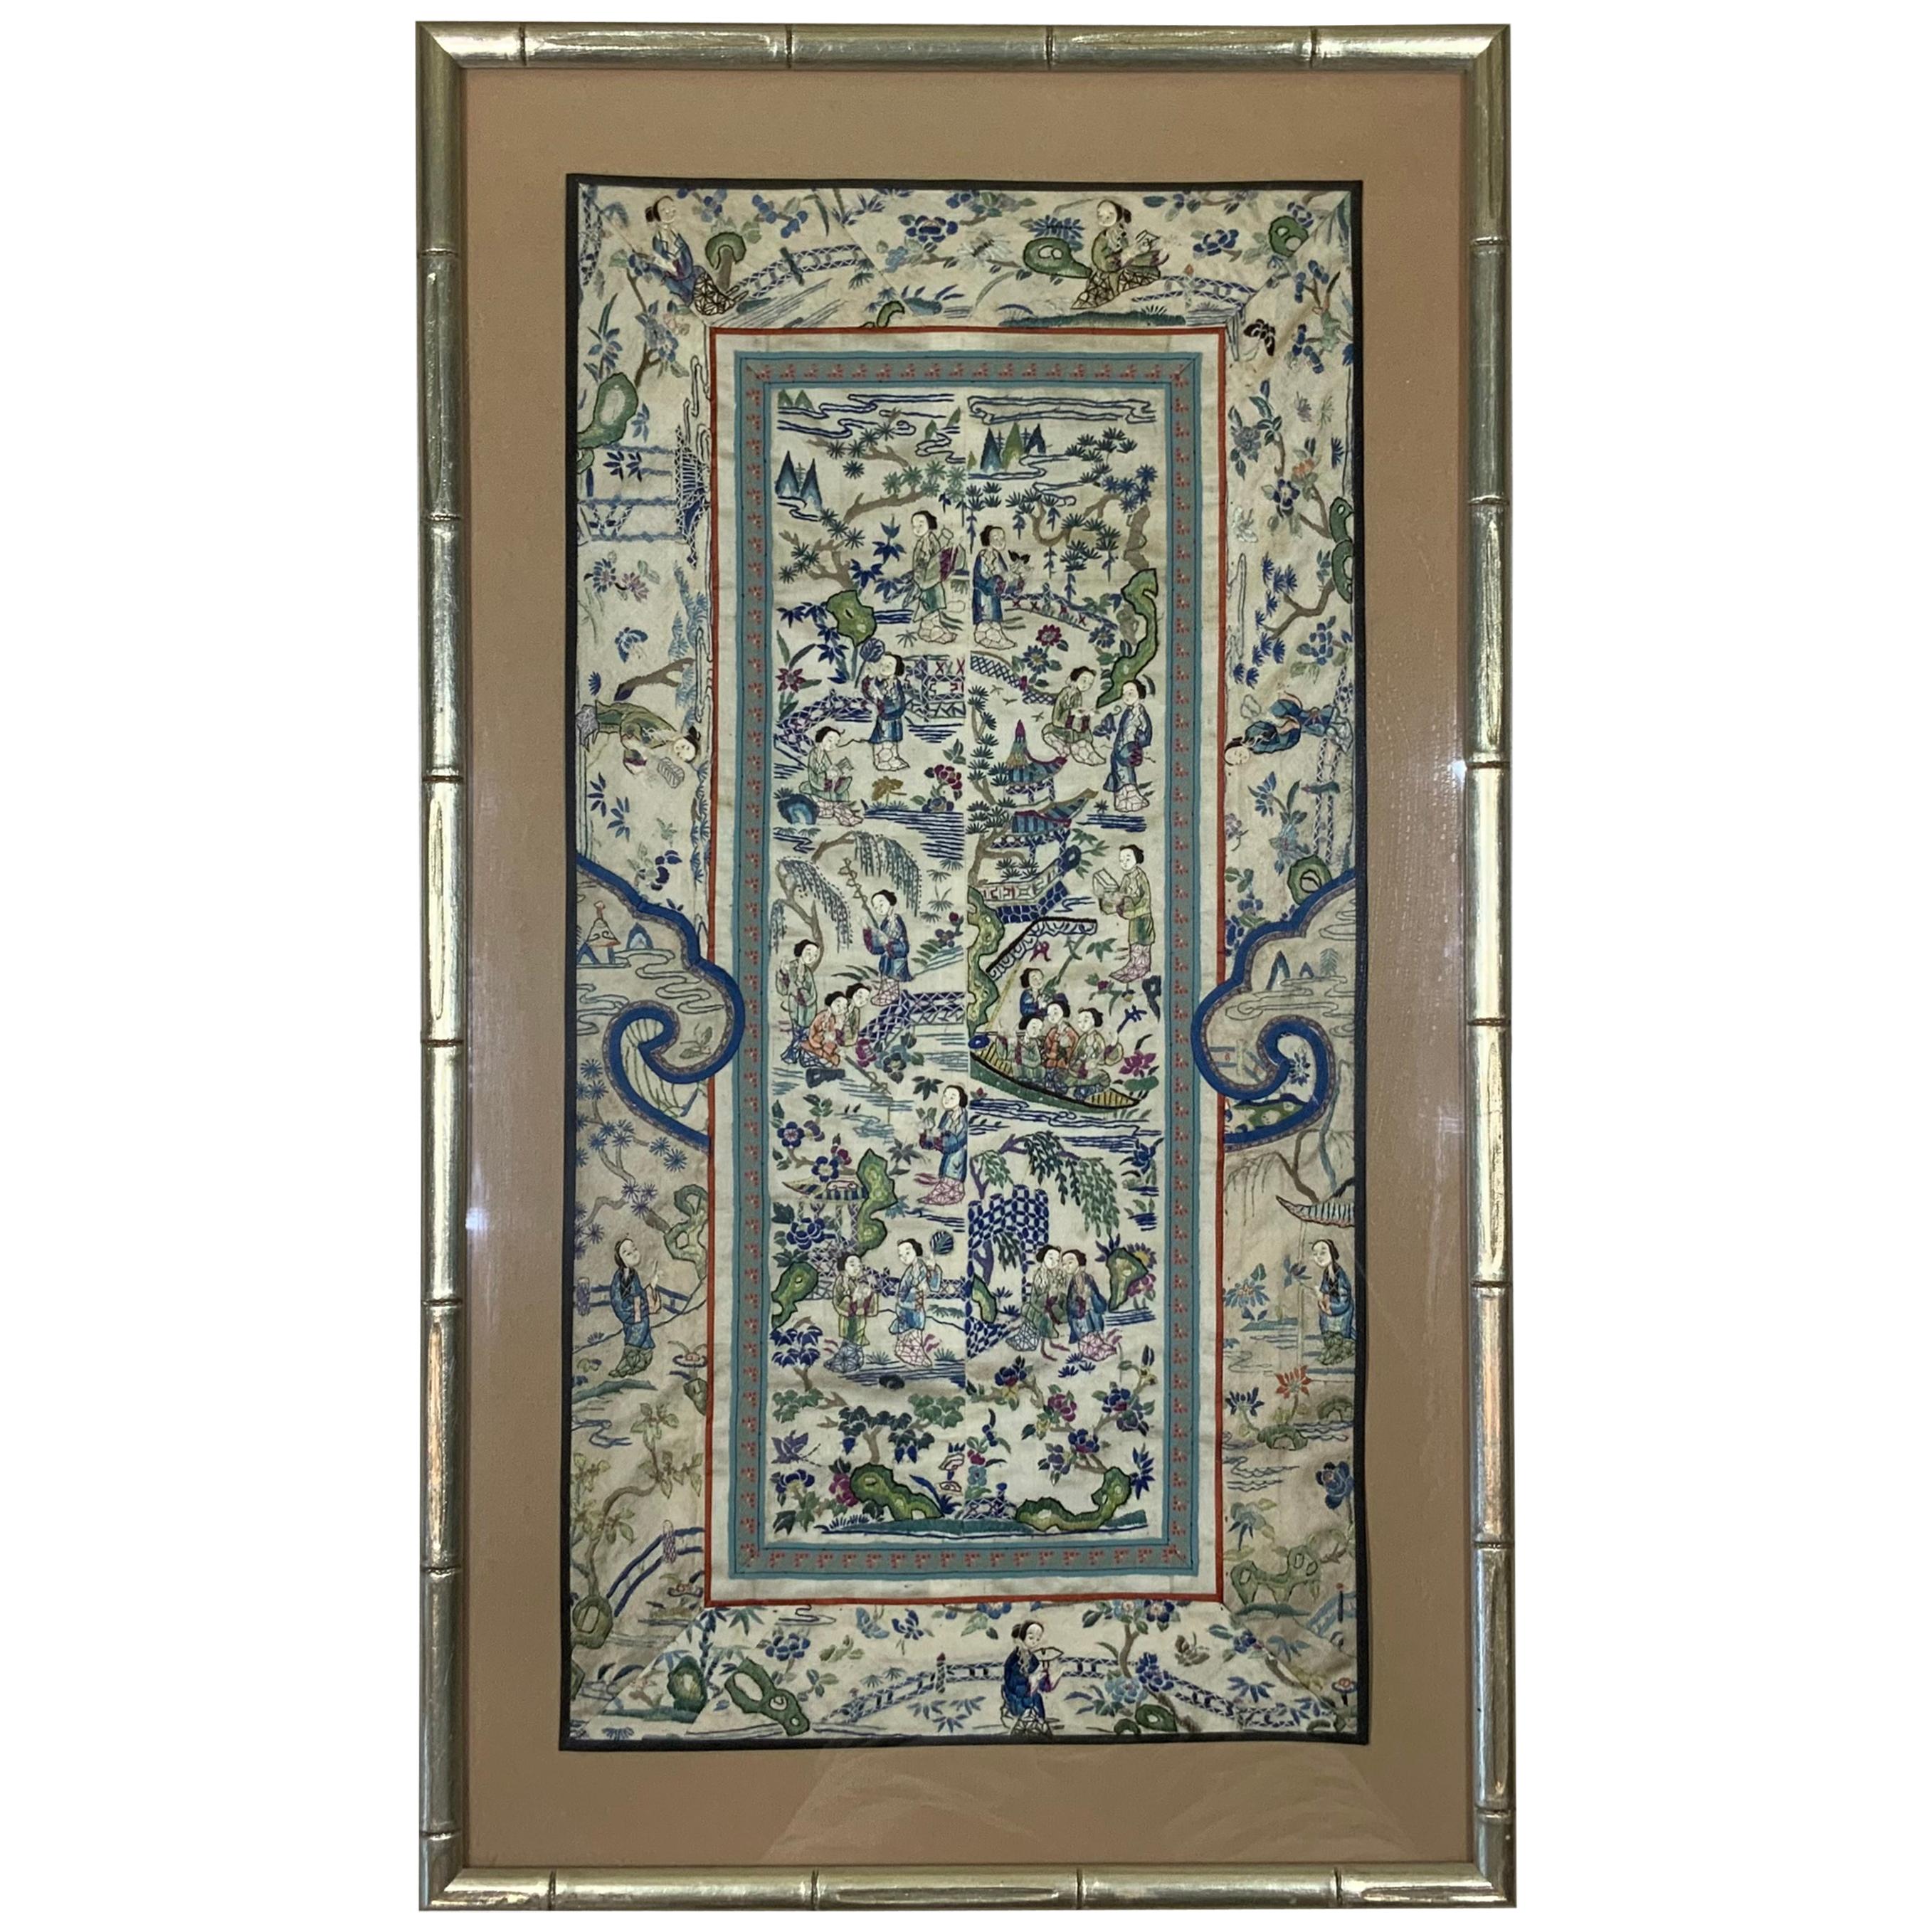 Framed Antique Chinese Textile